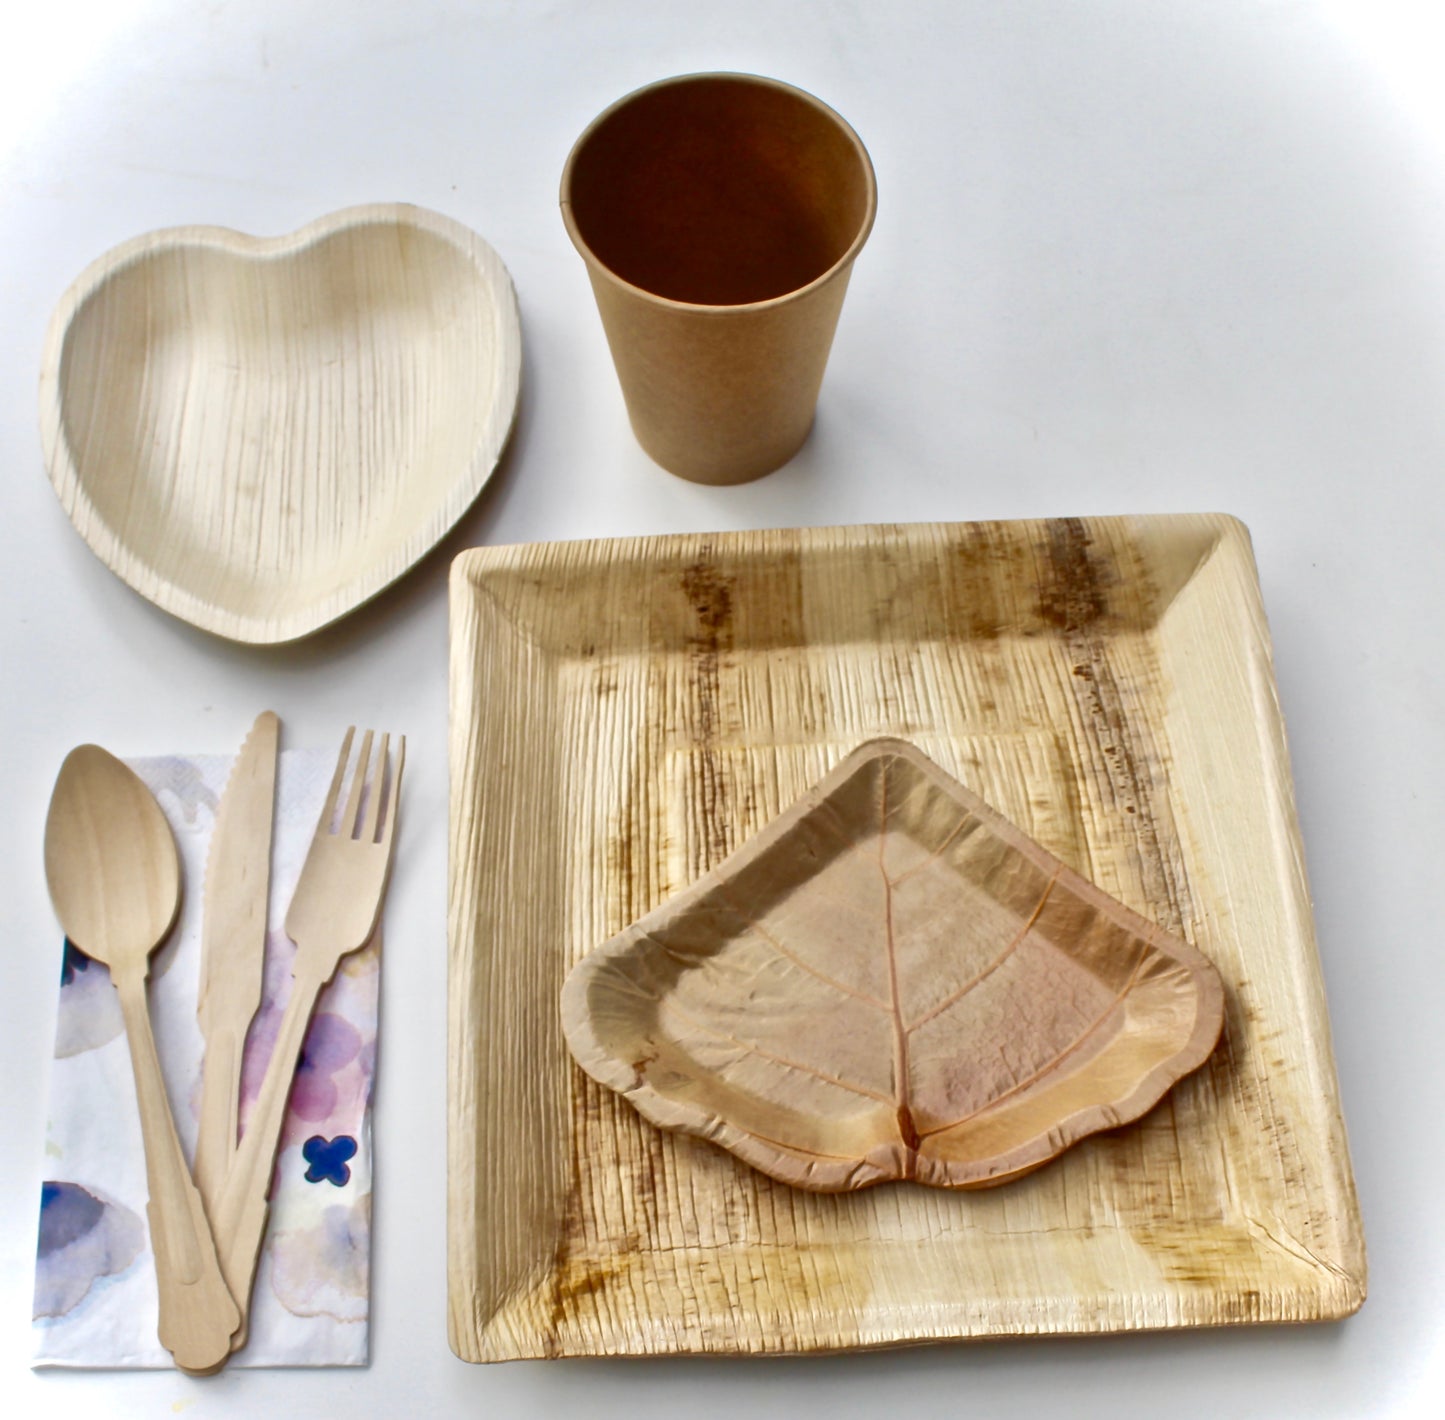 bambo Type plalm Leaf Plate 40 Pic Deep Square 10" - 40 Pic Sea Grape Dessert Plate 7" - 90 Pic Utensils Wood Birch and 40 pic Napkin